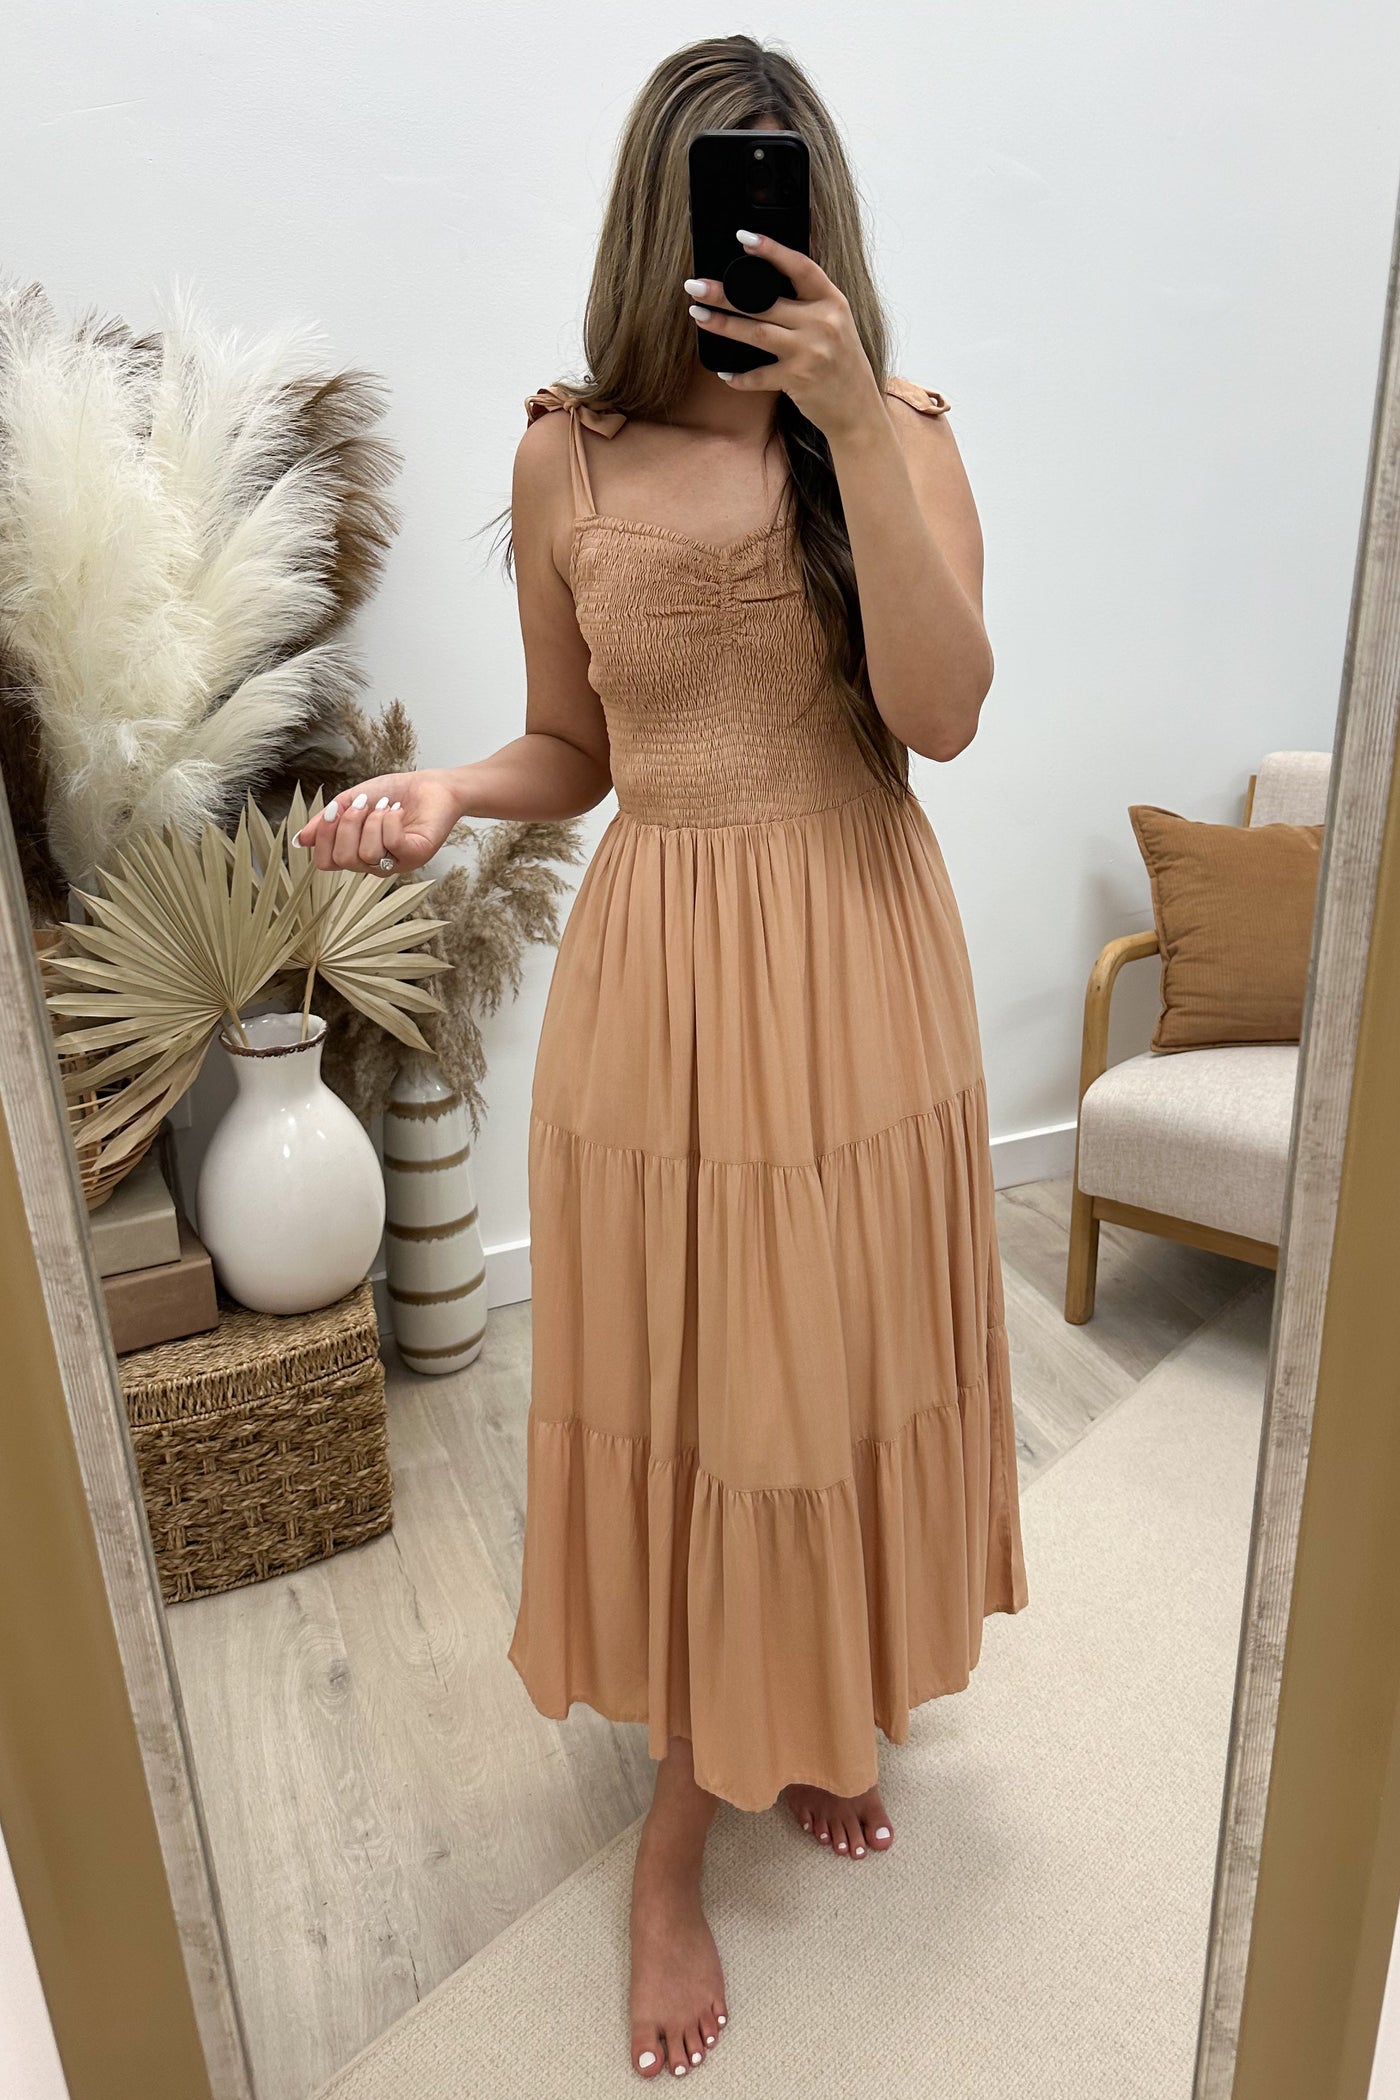 "Spring Is Near" Dress (Dusty Peach) - Happily Ever Aften